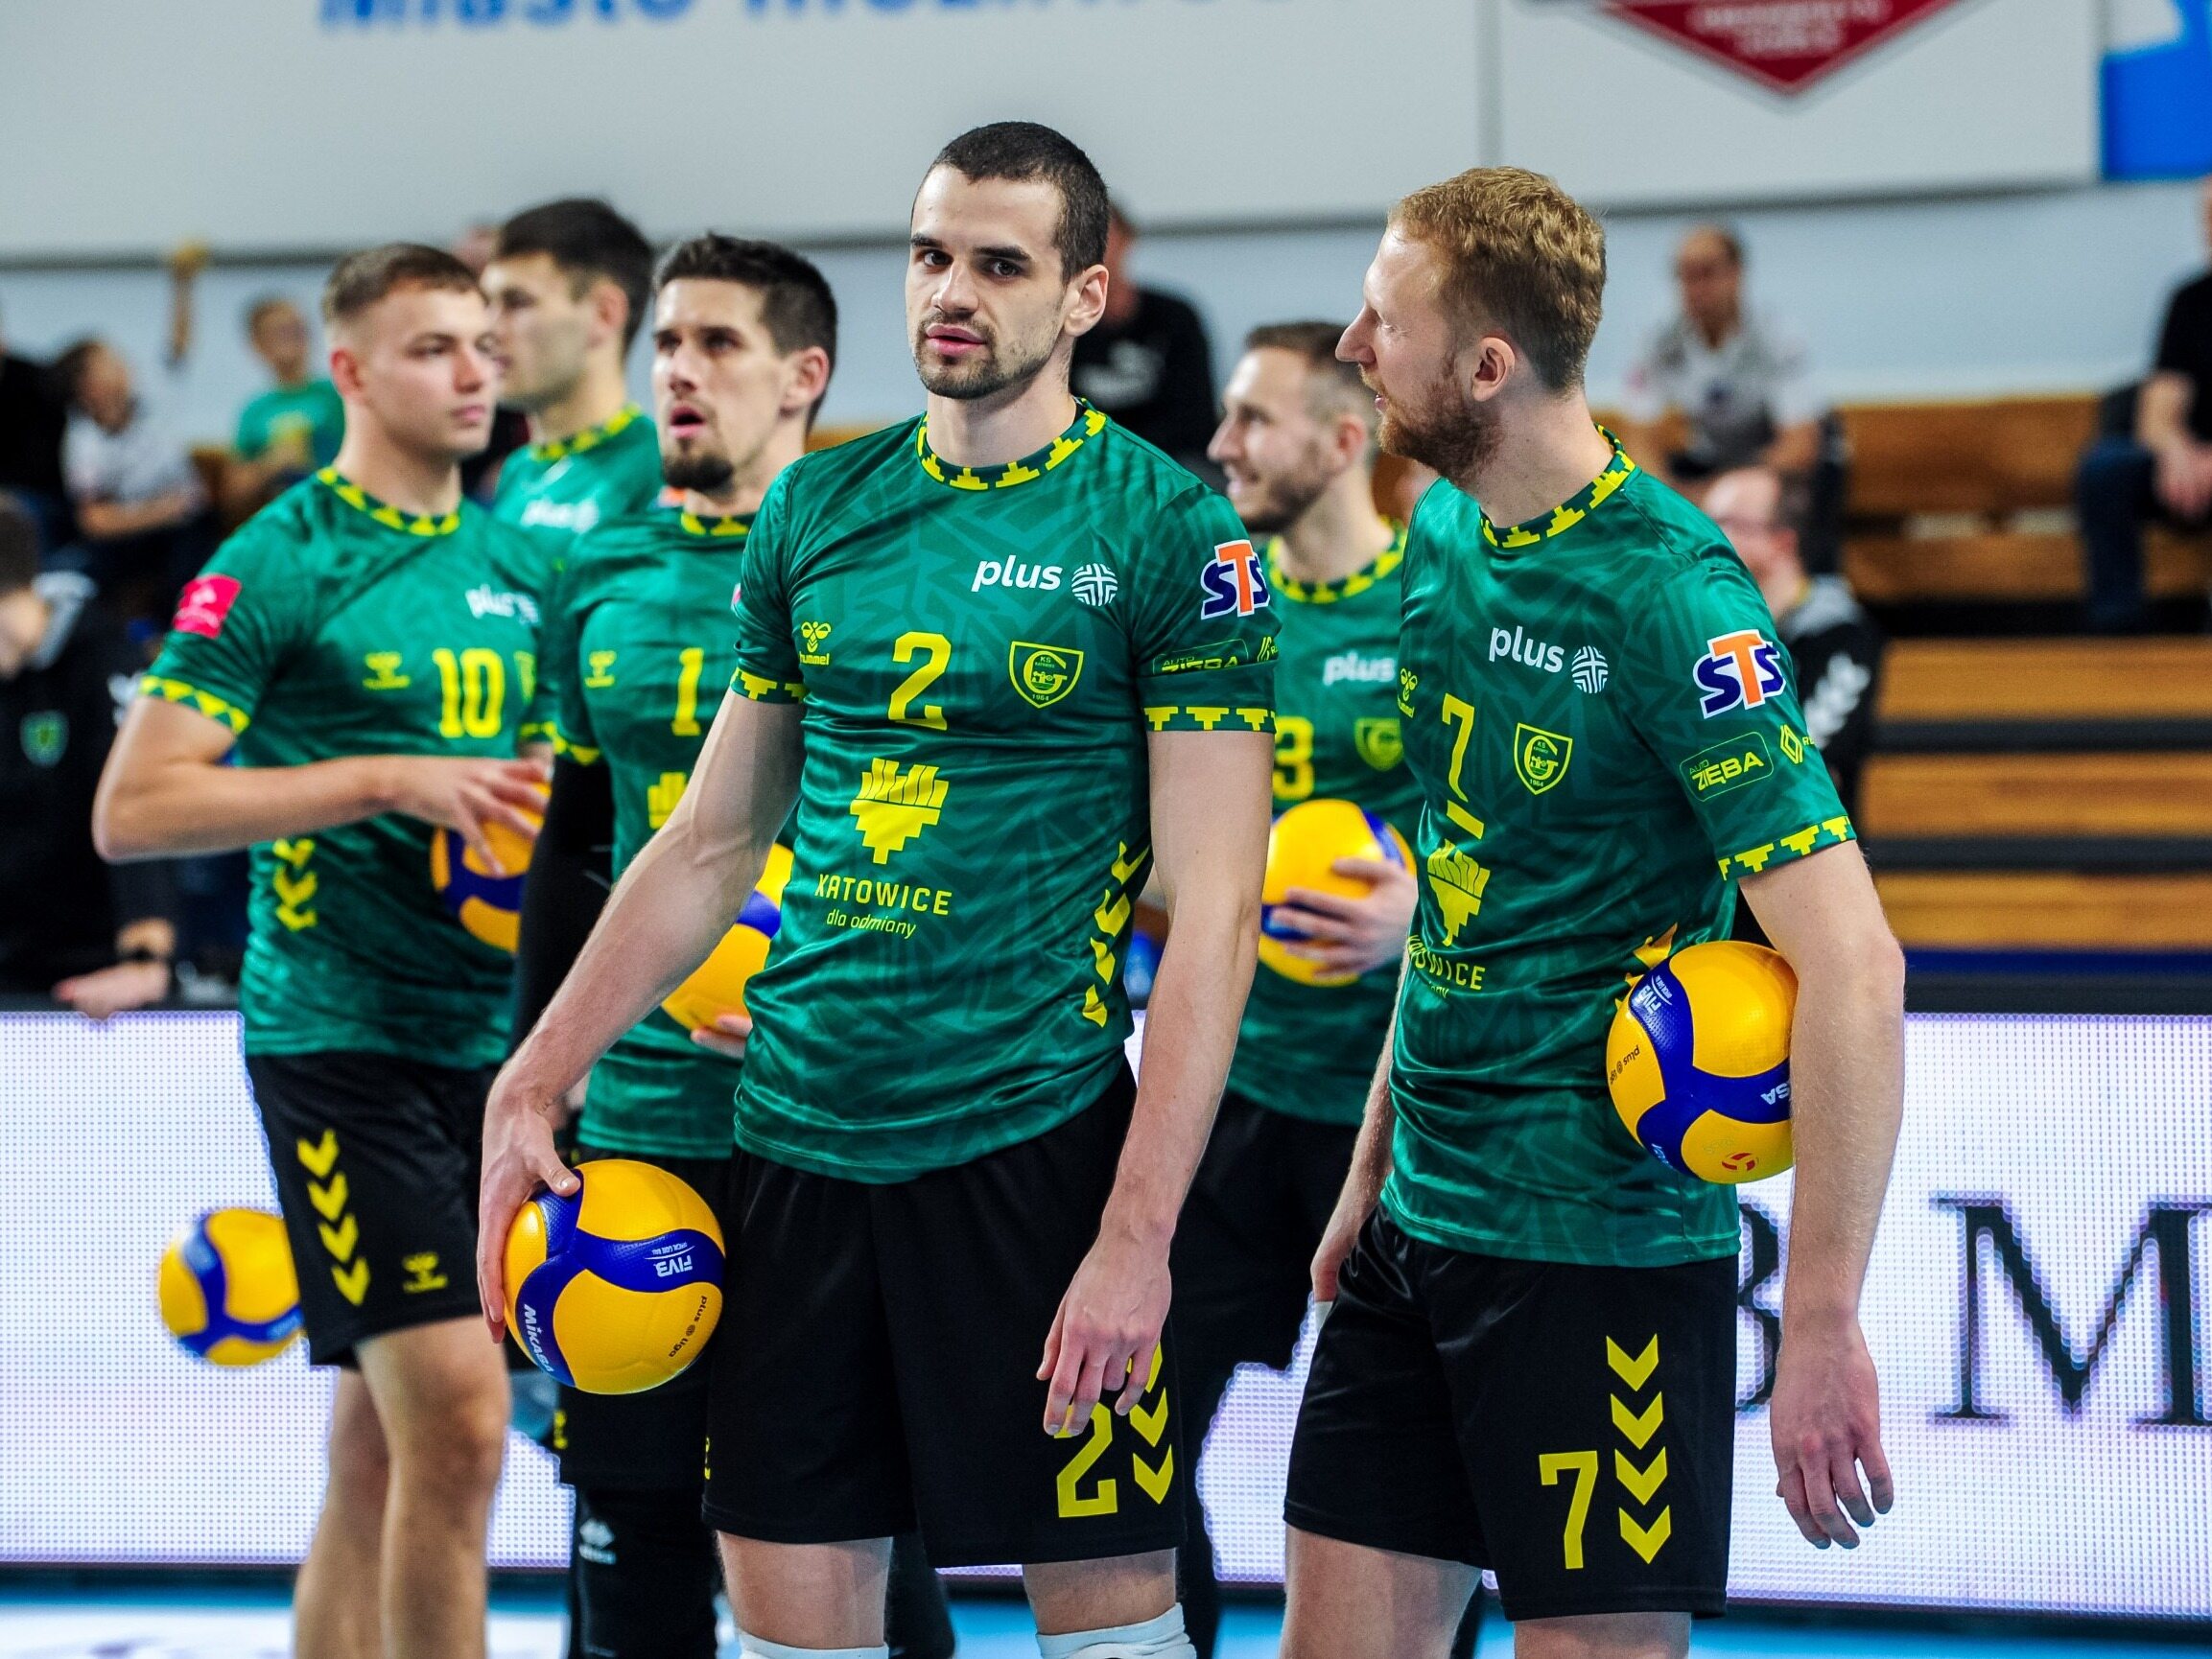 The player left the PlusLiga club.  He got the chance of a lifetime